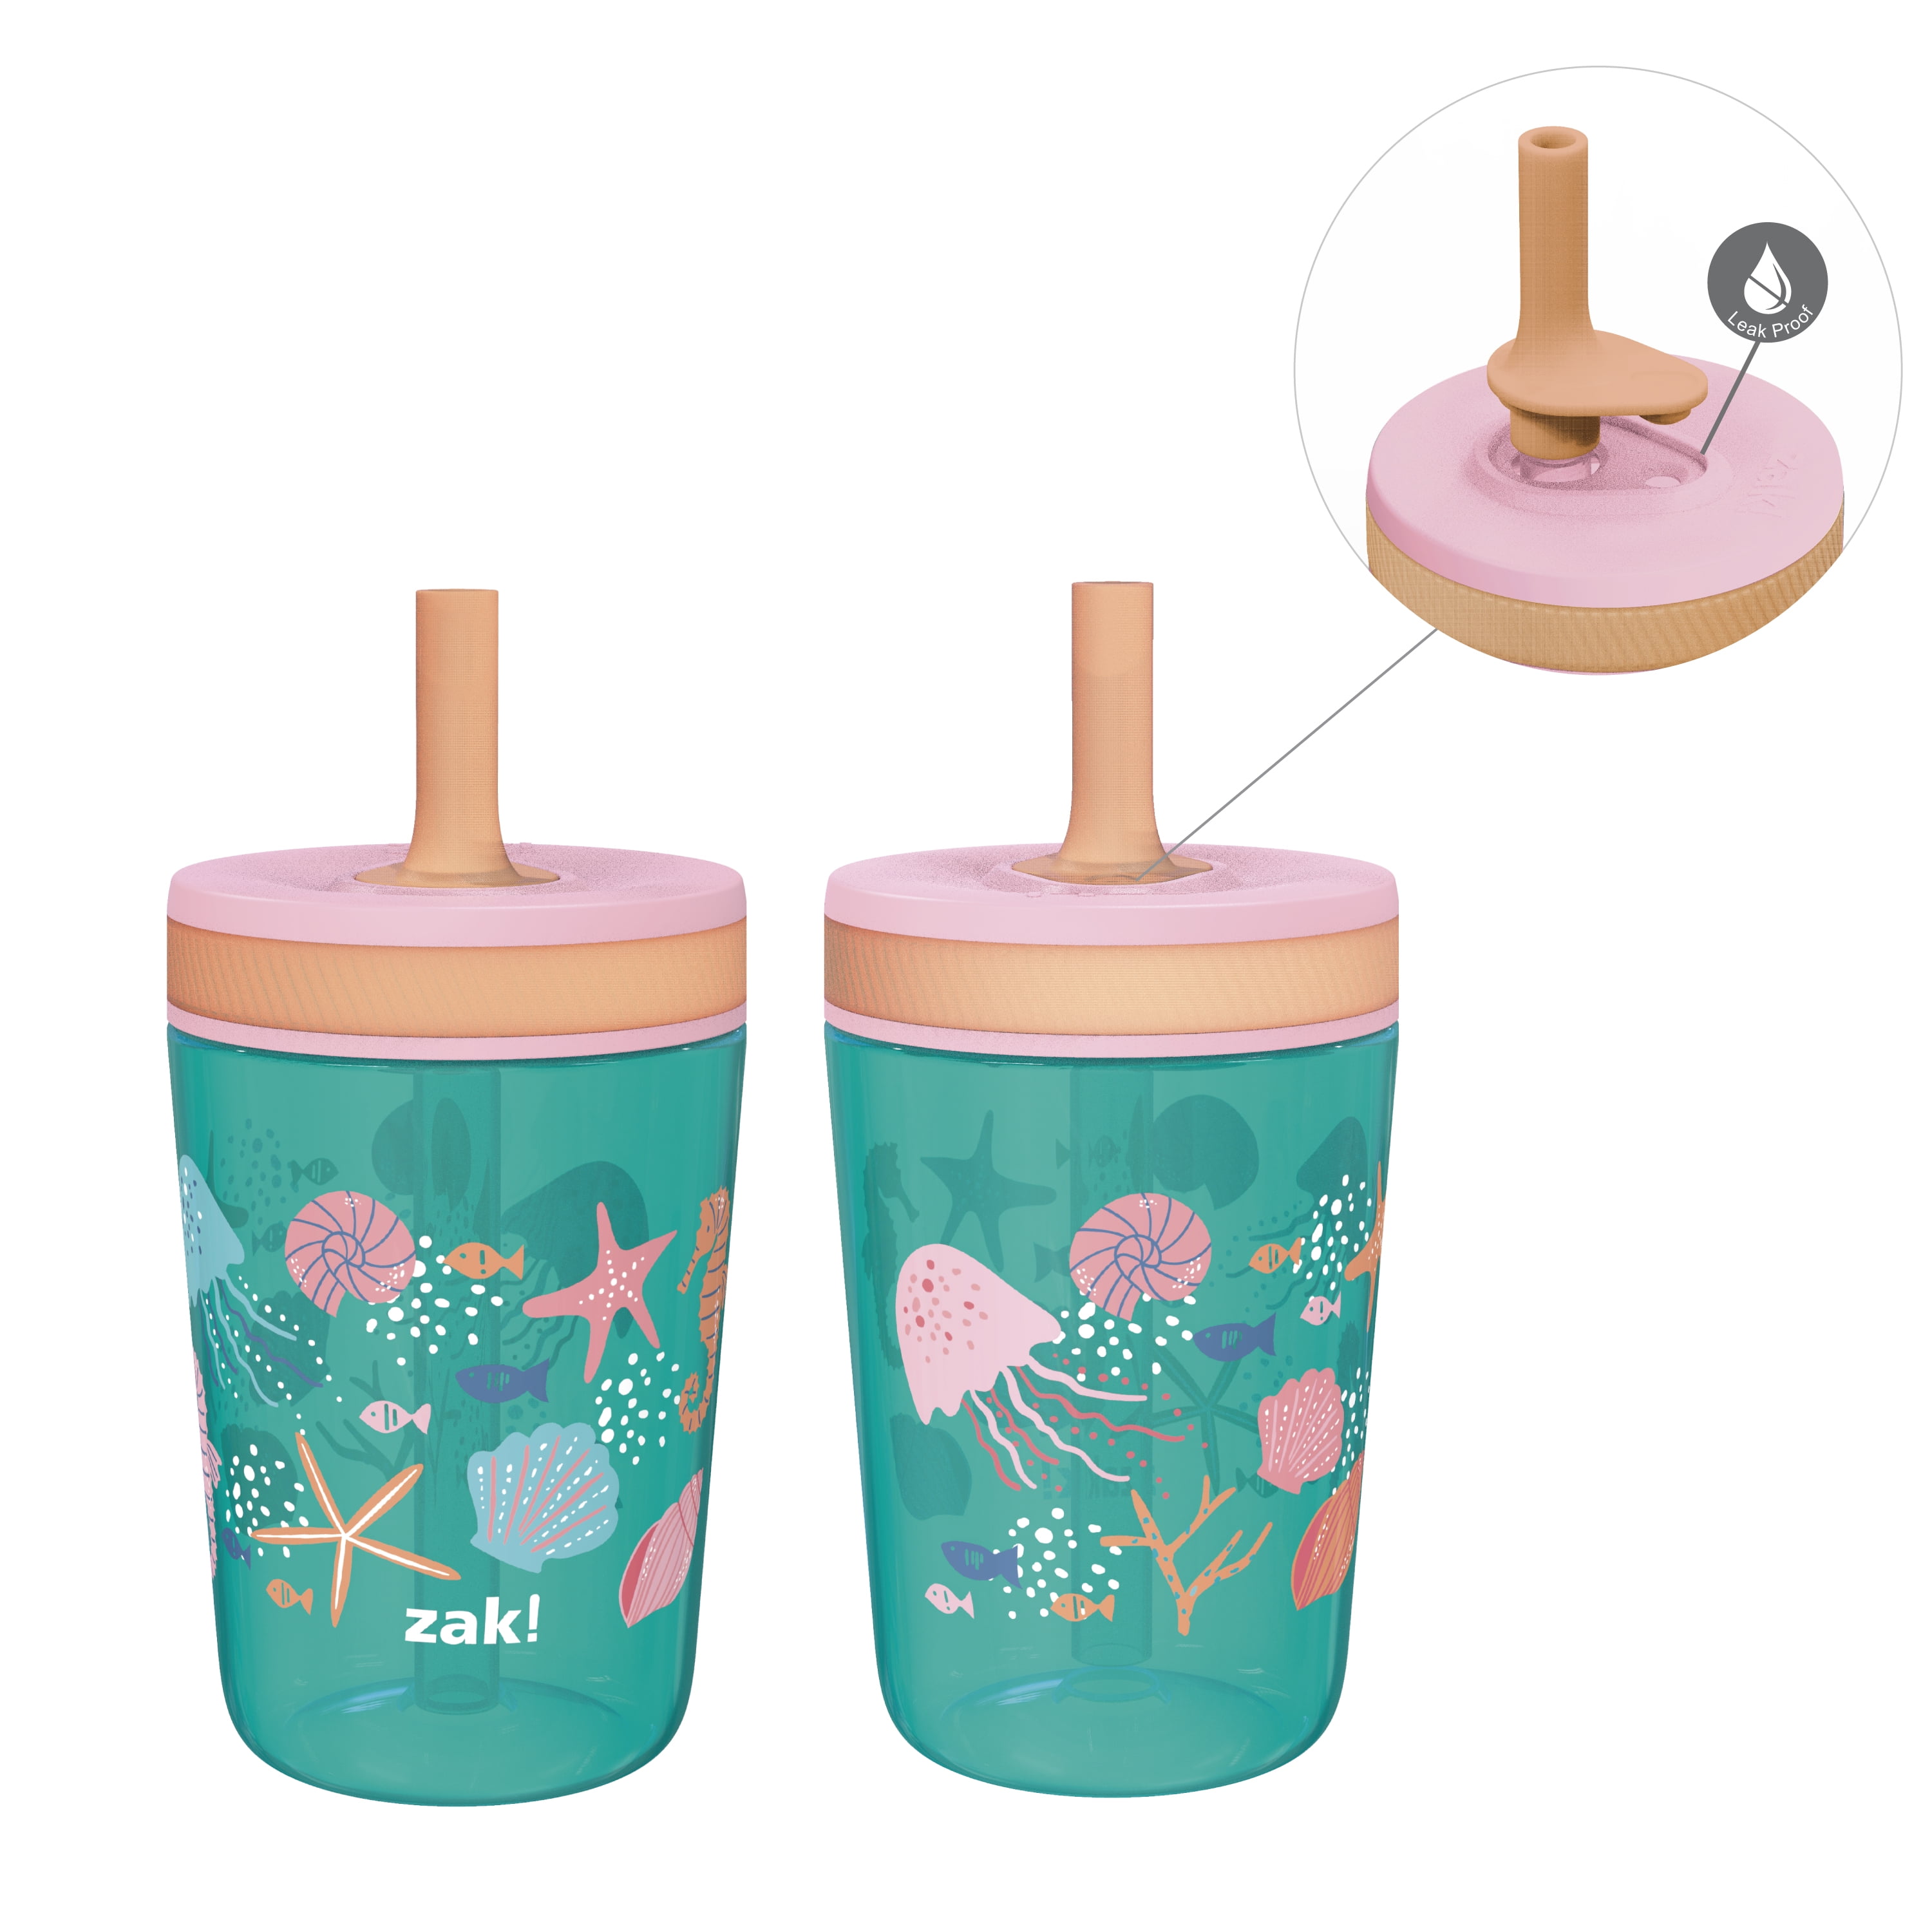  Vodolo Straw Replacement Compatible with Zak Straw Cups for Kids,4PCS  15 oz Water Bottle Straw BPA-Free with Straw Cleaning Brush and Bite Valve  : Health & Household